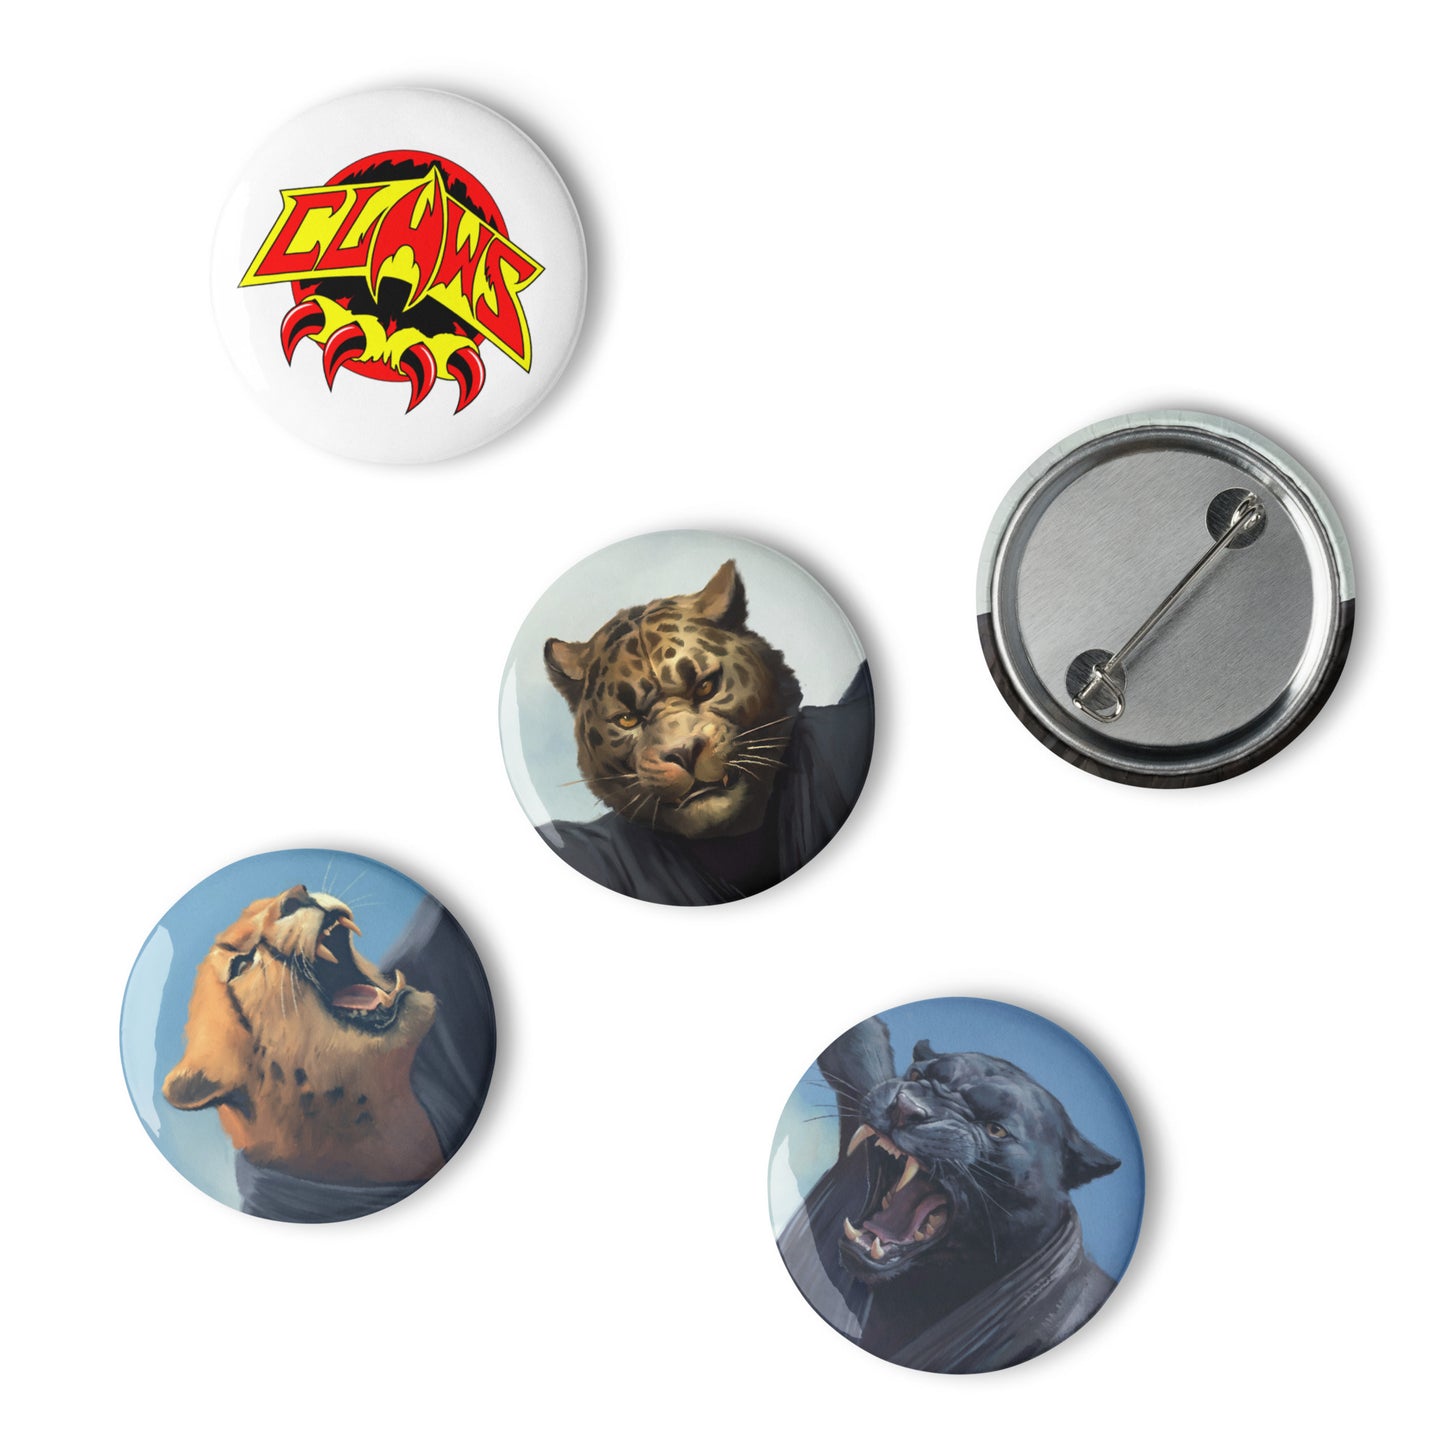 Zoo Jitsu Fighters CLAWS Pin Buttons Set - Icon Heroes 